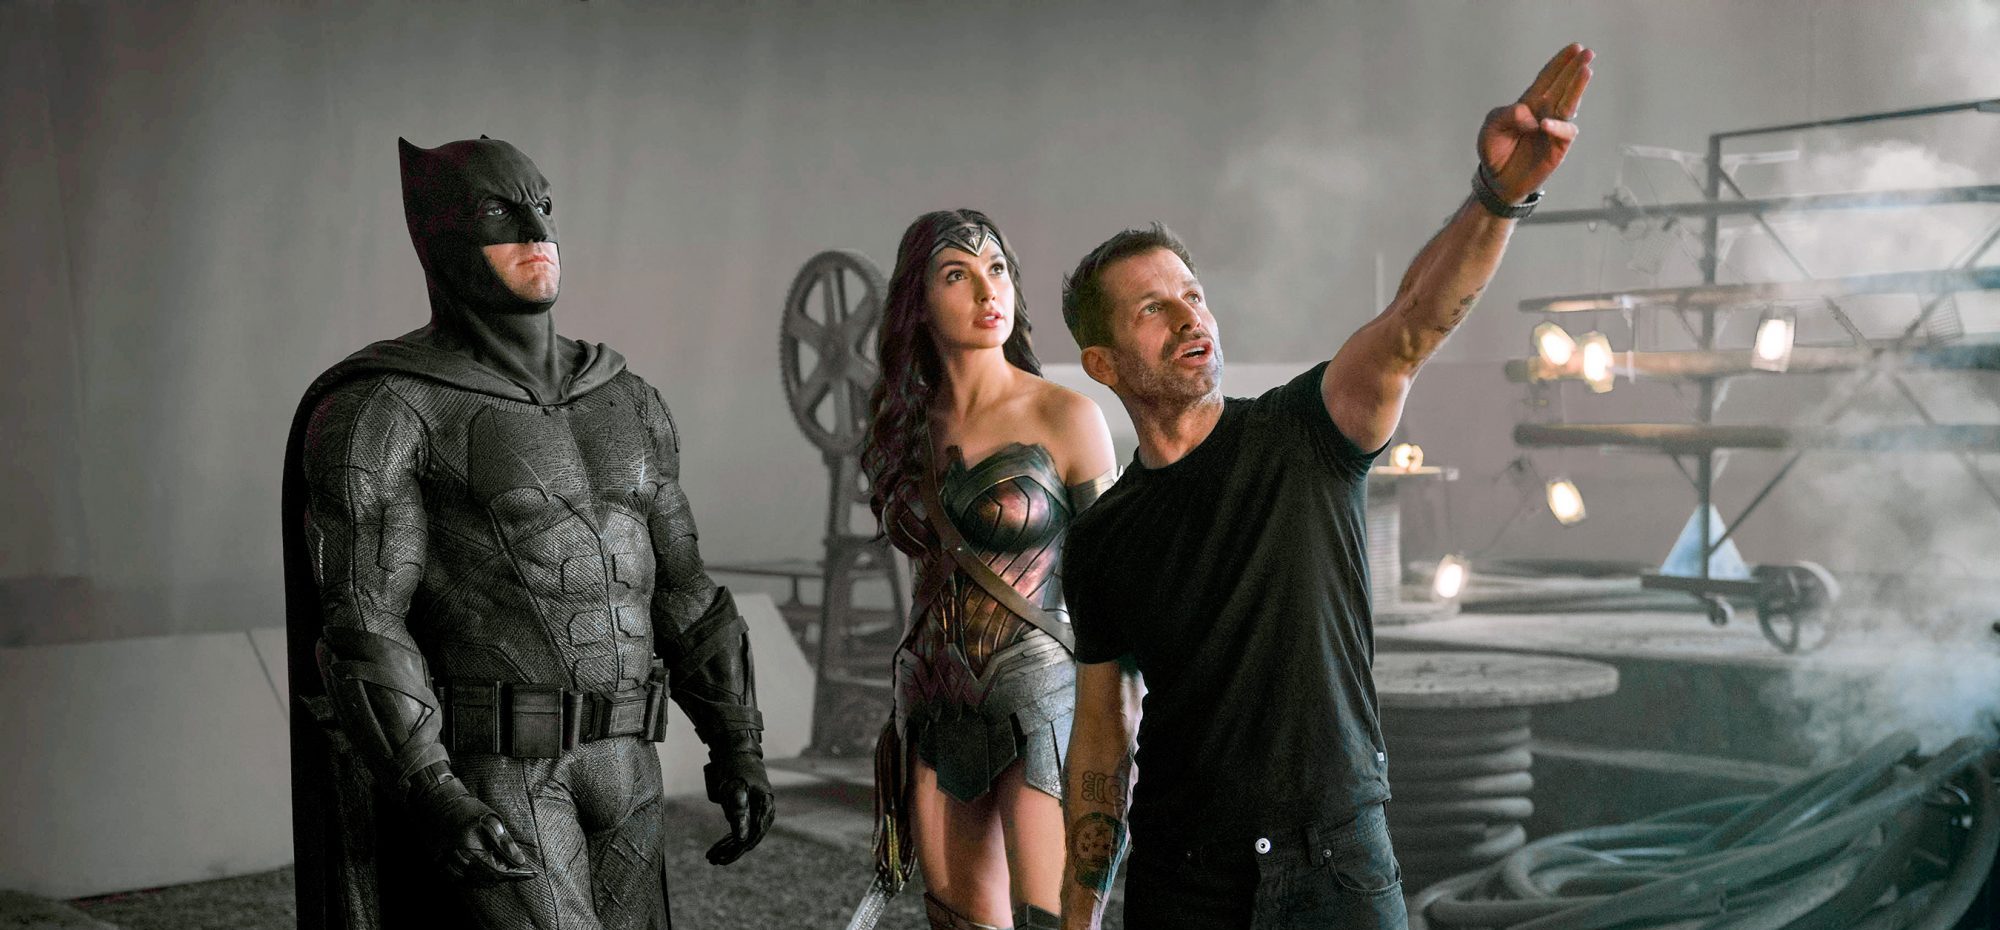 David Zaslav would only want Zack Snyder at the helm of projects for the Snyderverse.